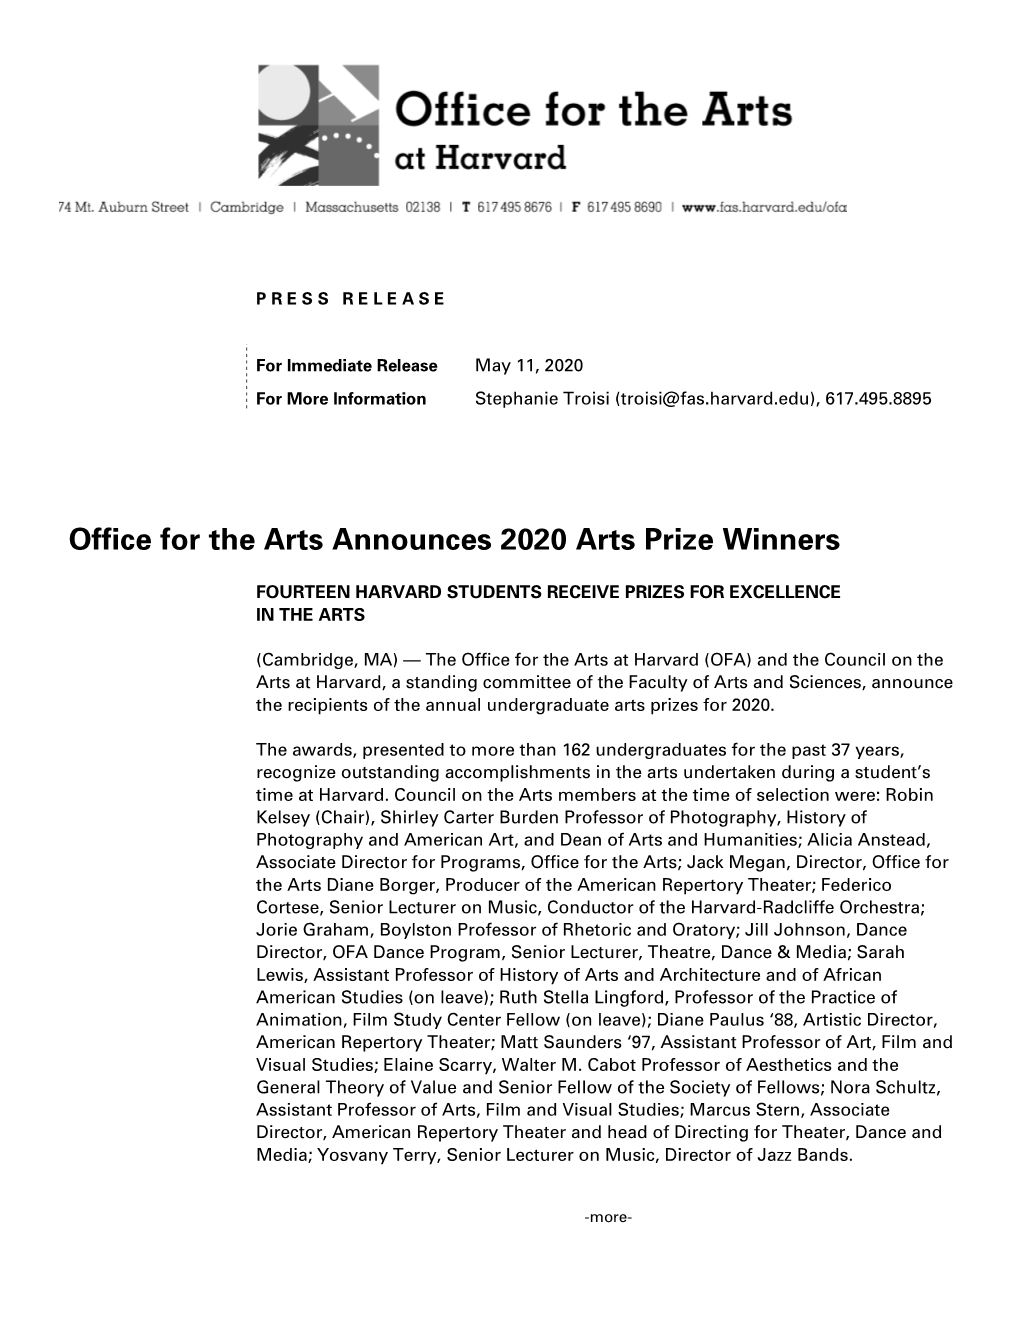 Office for the Arts Announces 2020 Arts Prize Winners